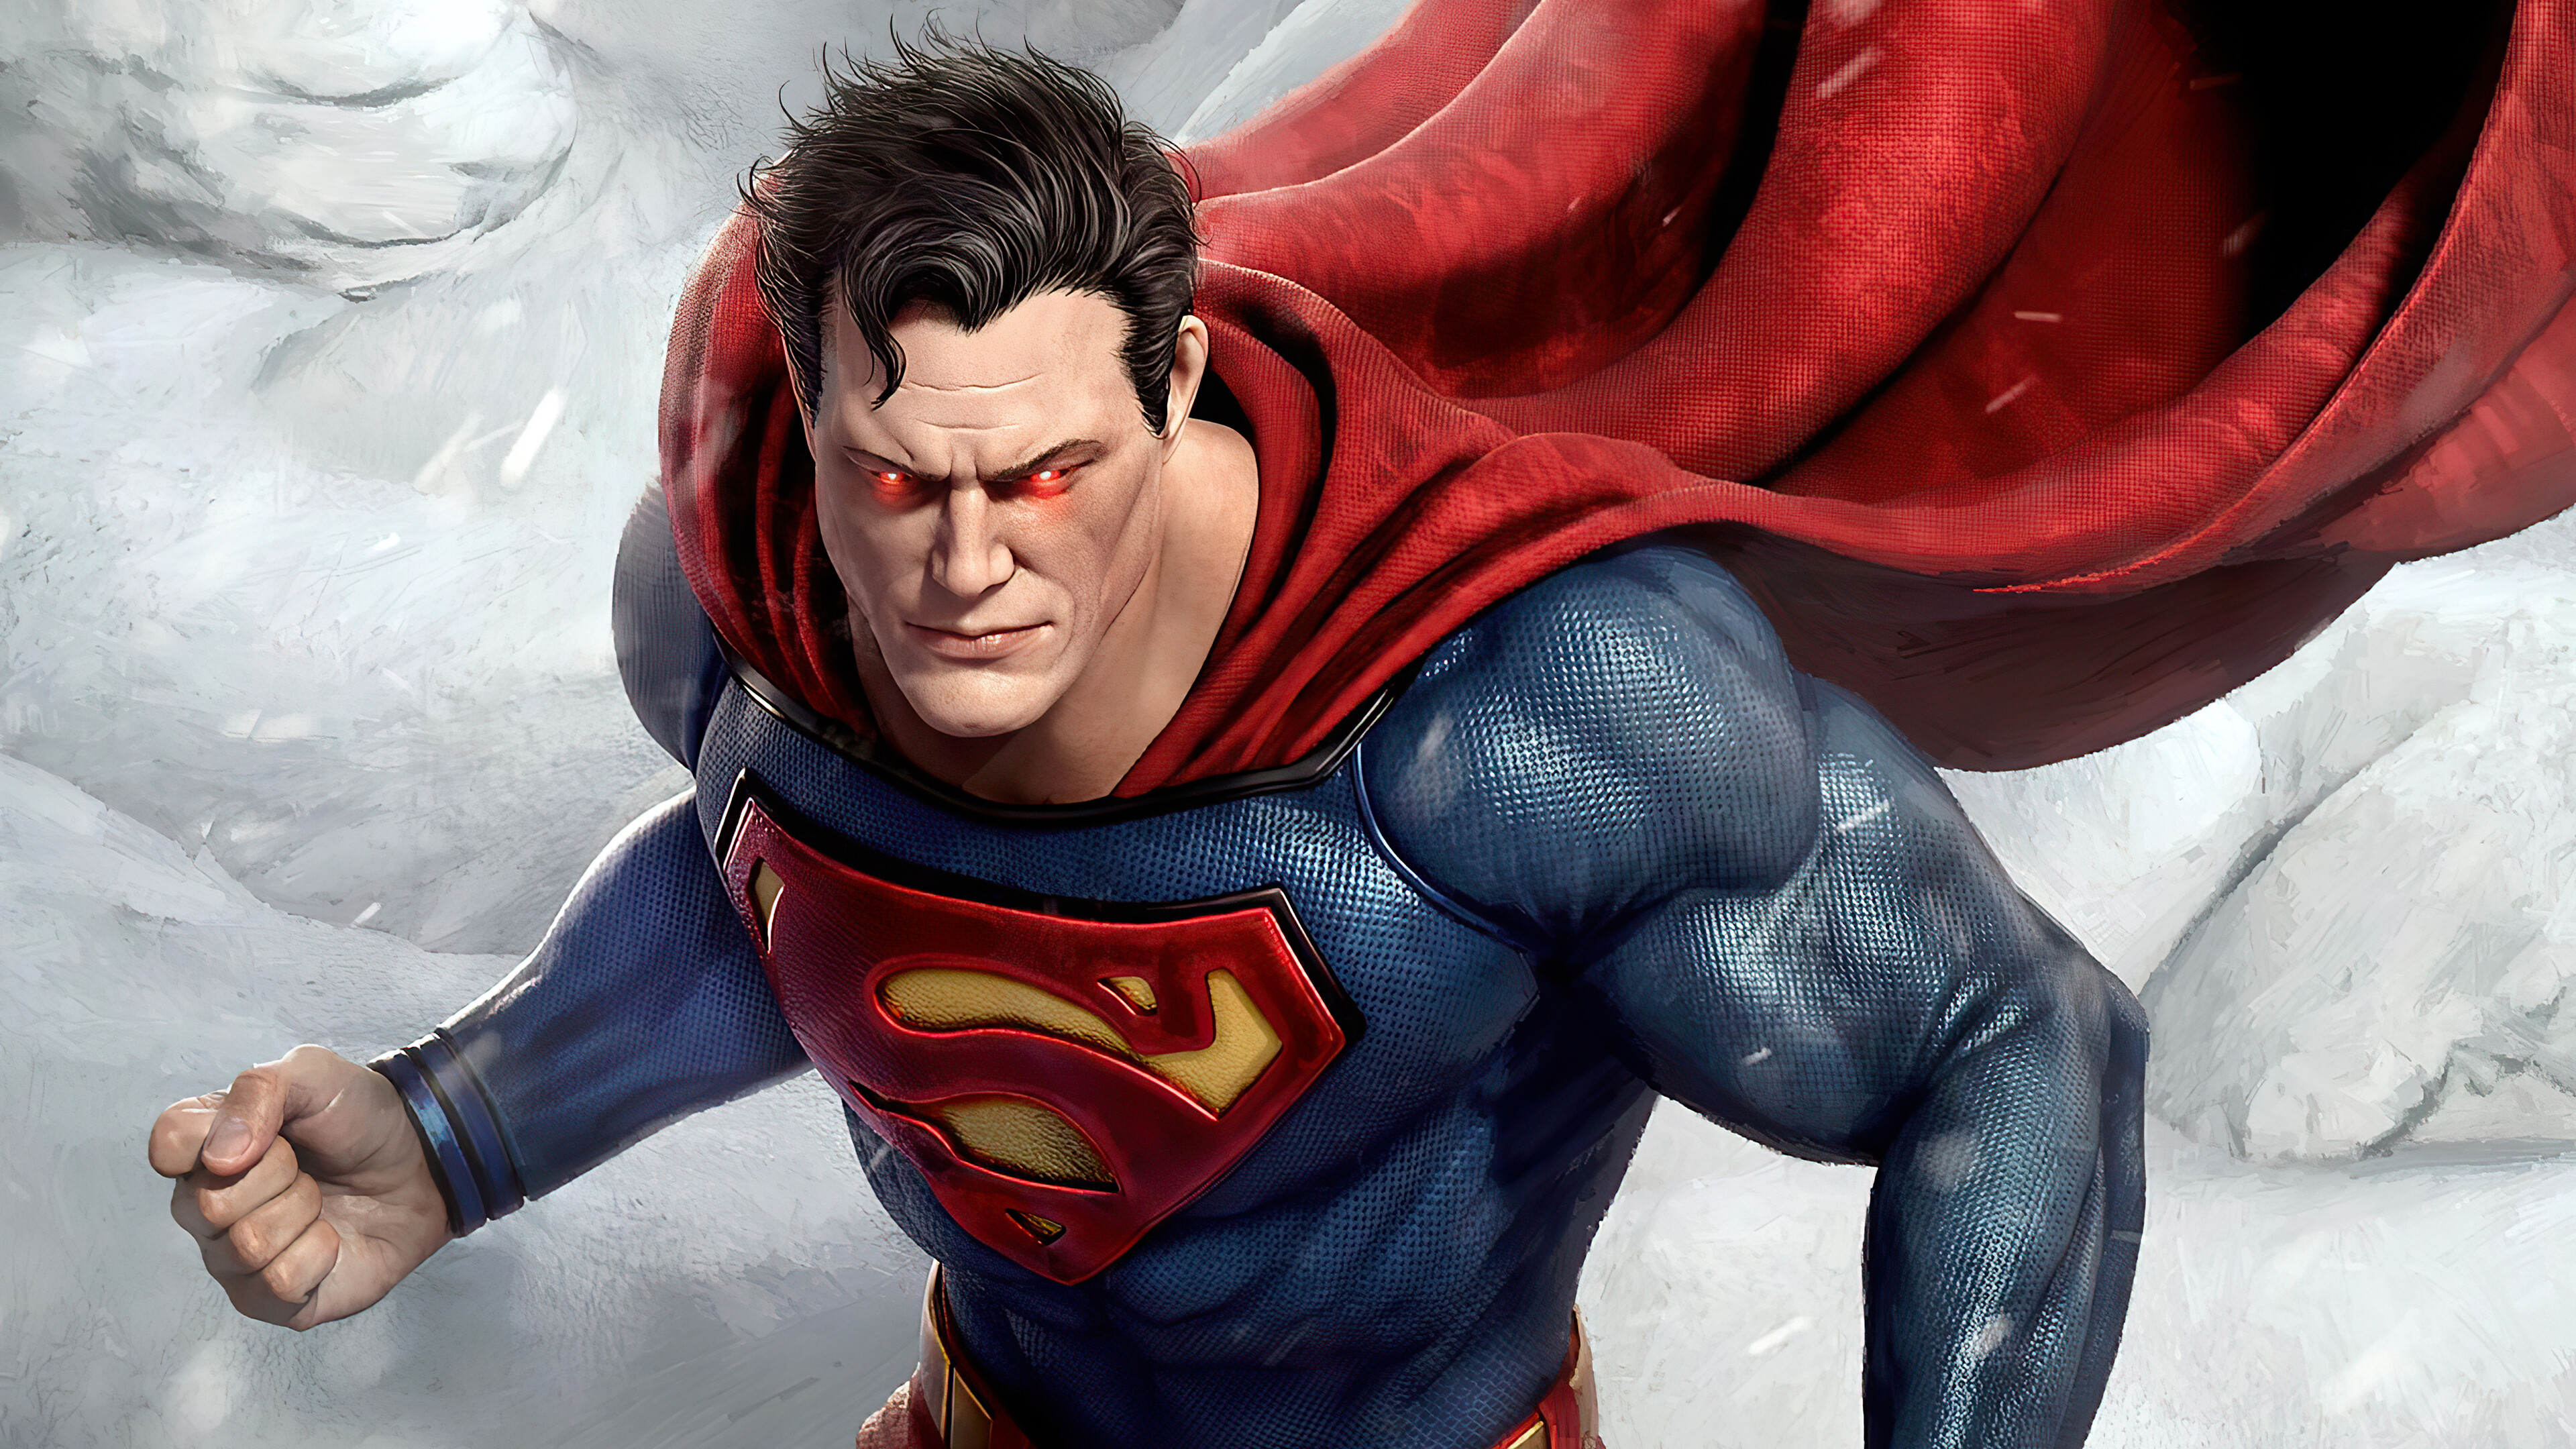 DC Heroes: Superman, was born on the fictional planet Krypton and was named Kal-El. 3840x2160 4K Wallpaper.